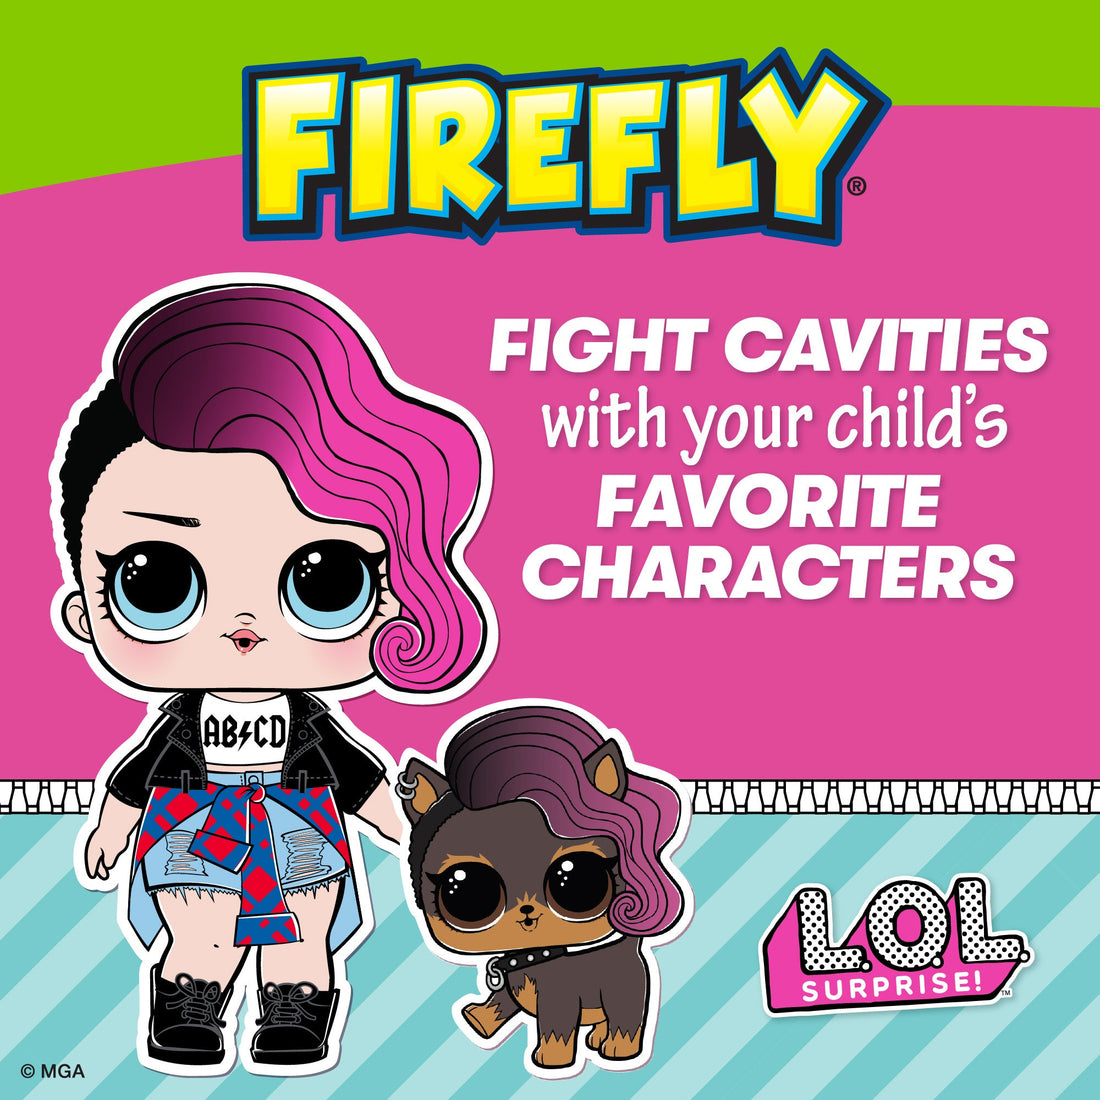 L.O.L. SURPRISE! Character and a pet, L.O.L. SURPRISE! logo, Fight cavities with your child&